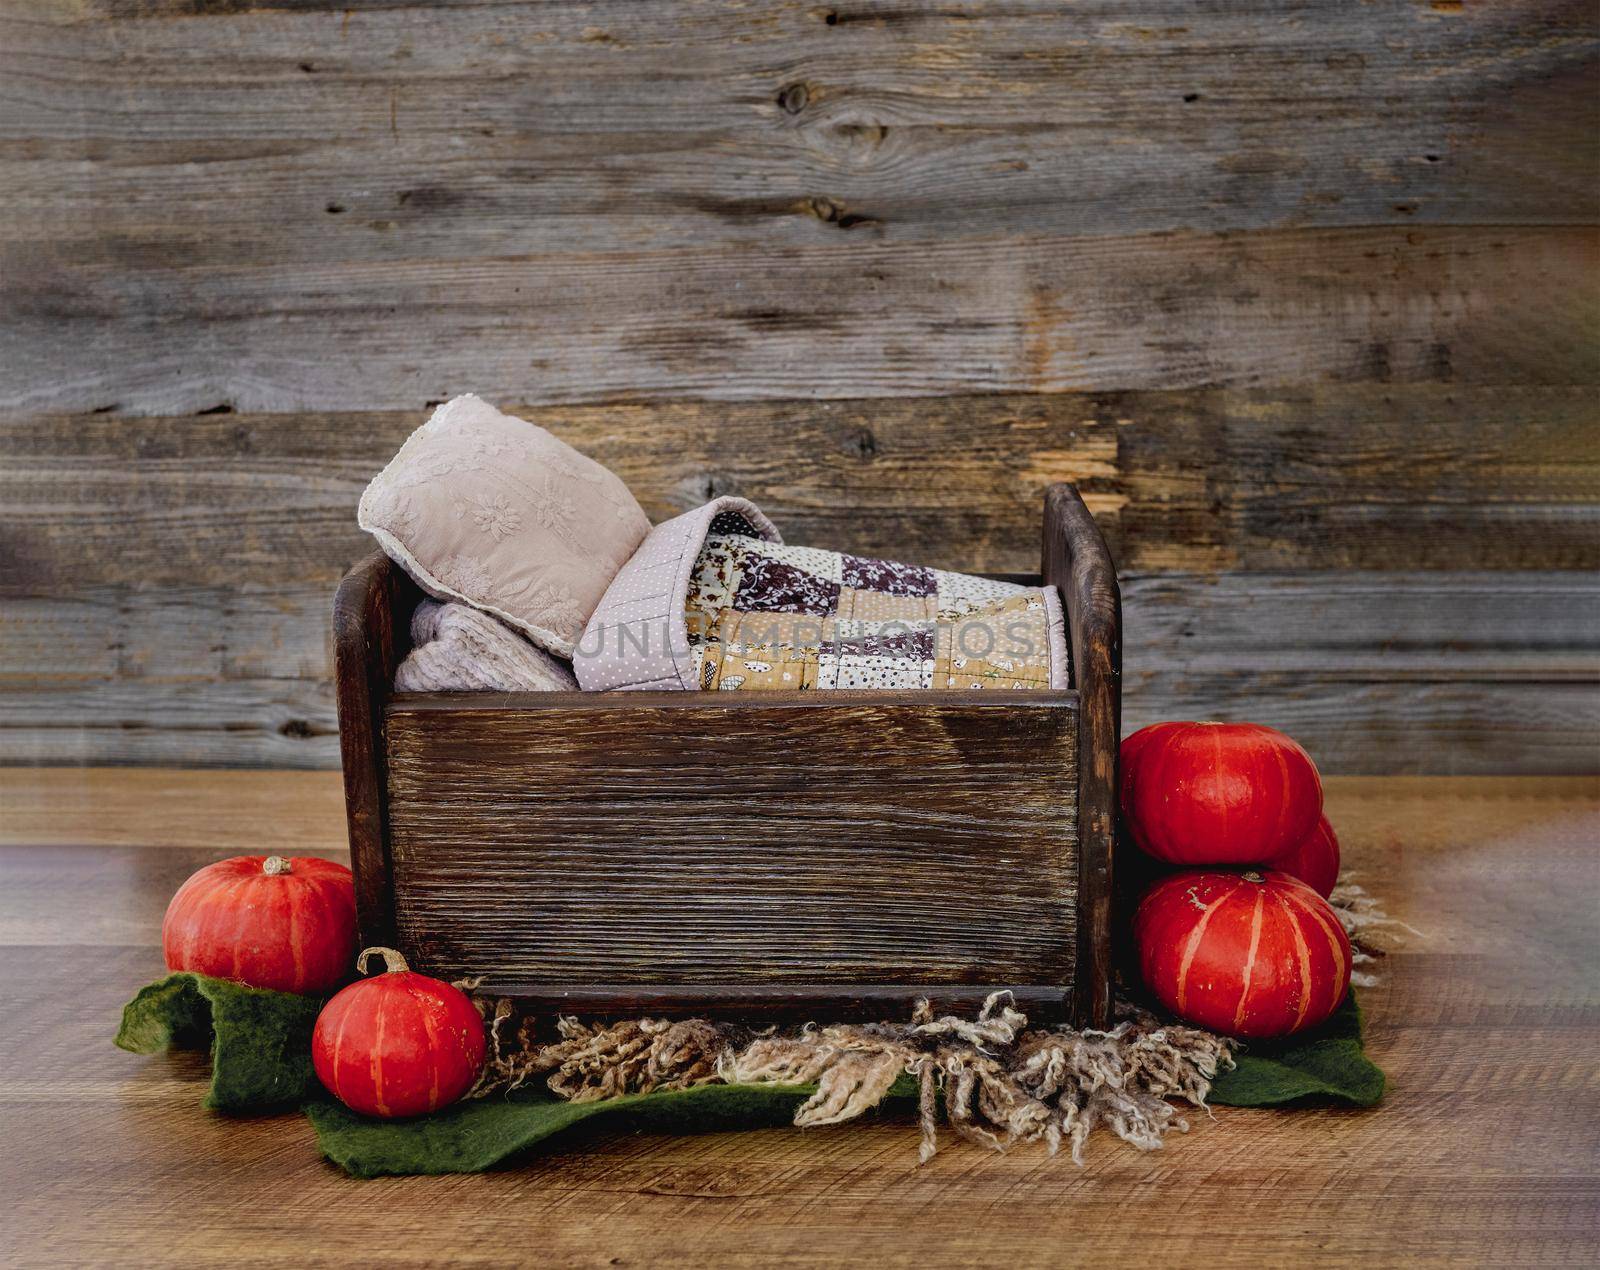 Tiny wooden bed for newborn baby photoshoot decorated with autumn pampkins. Studio handmade scene for halloween infant child photos indoors